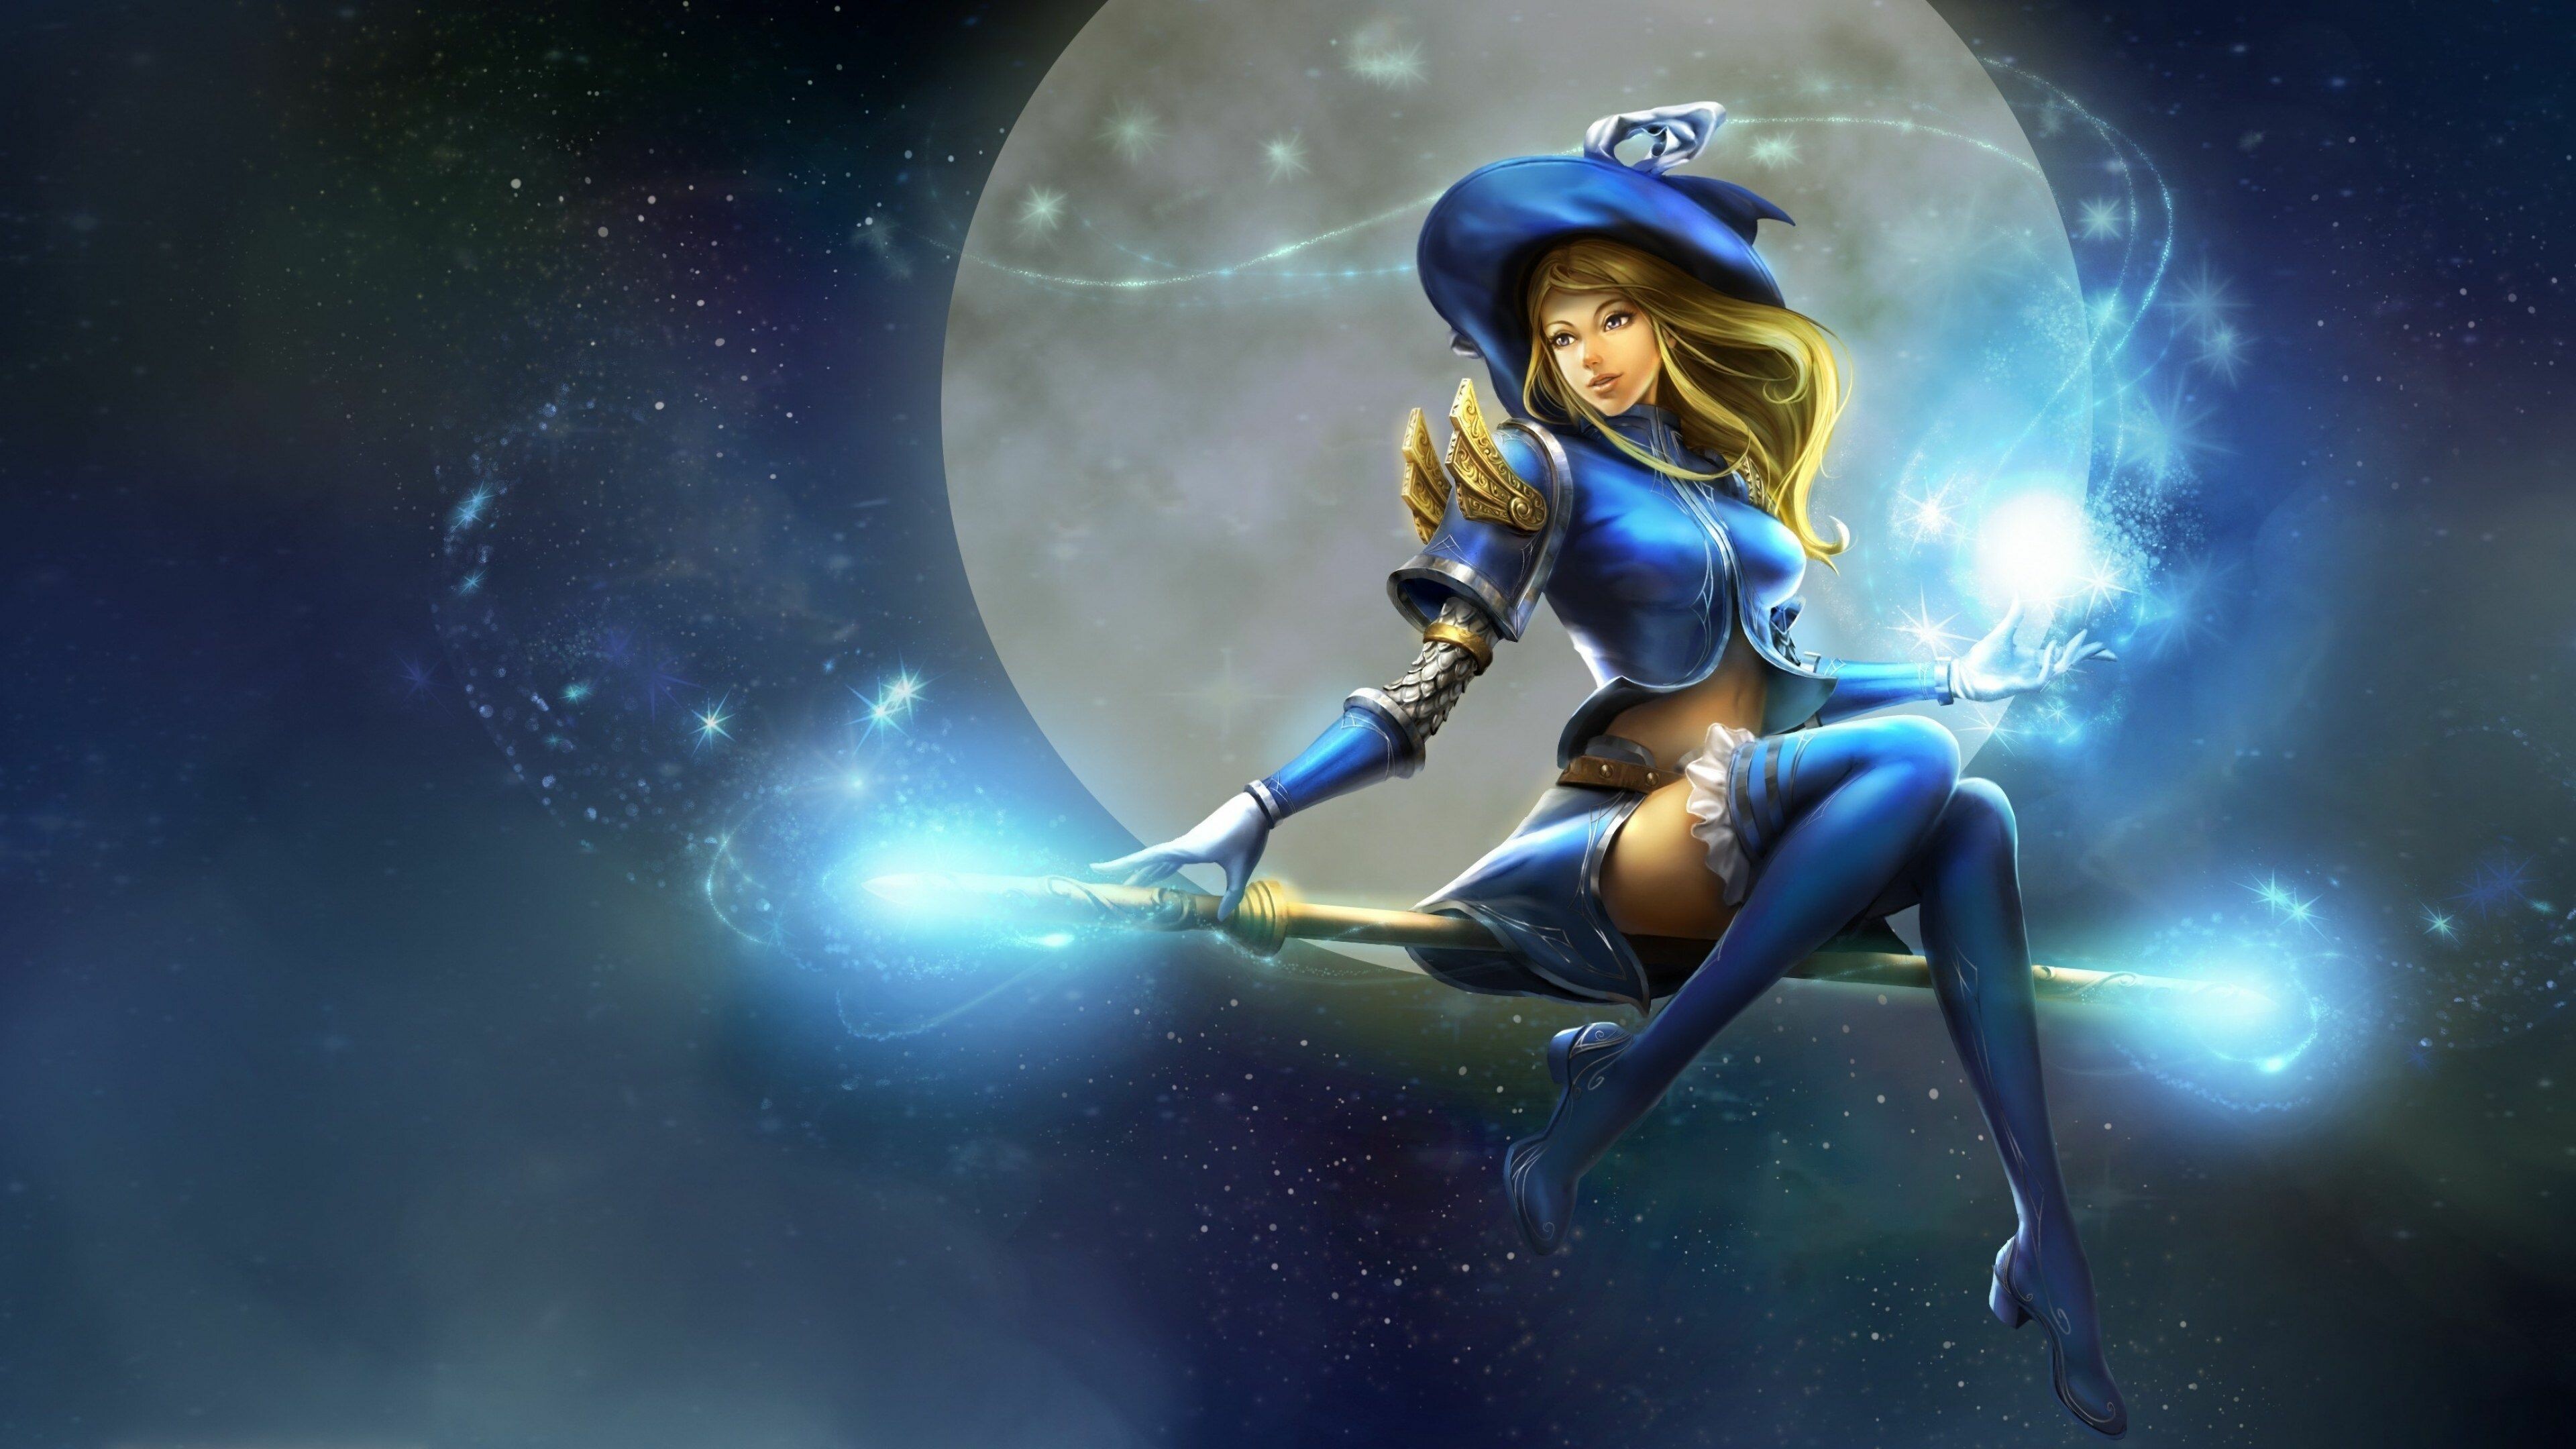 Witch: League of Legends, Fictional character, Magic. 3840x2160 4K Background.